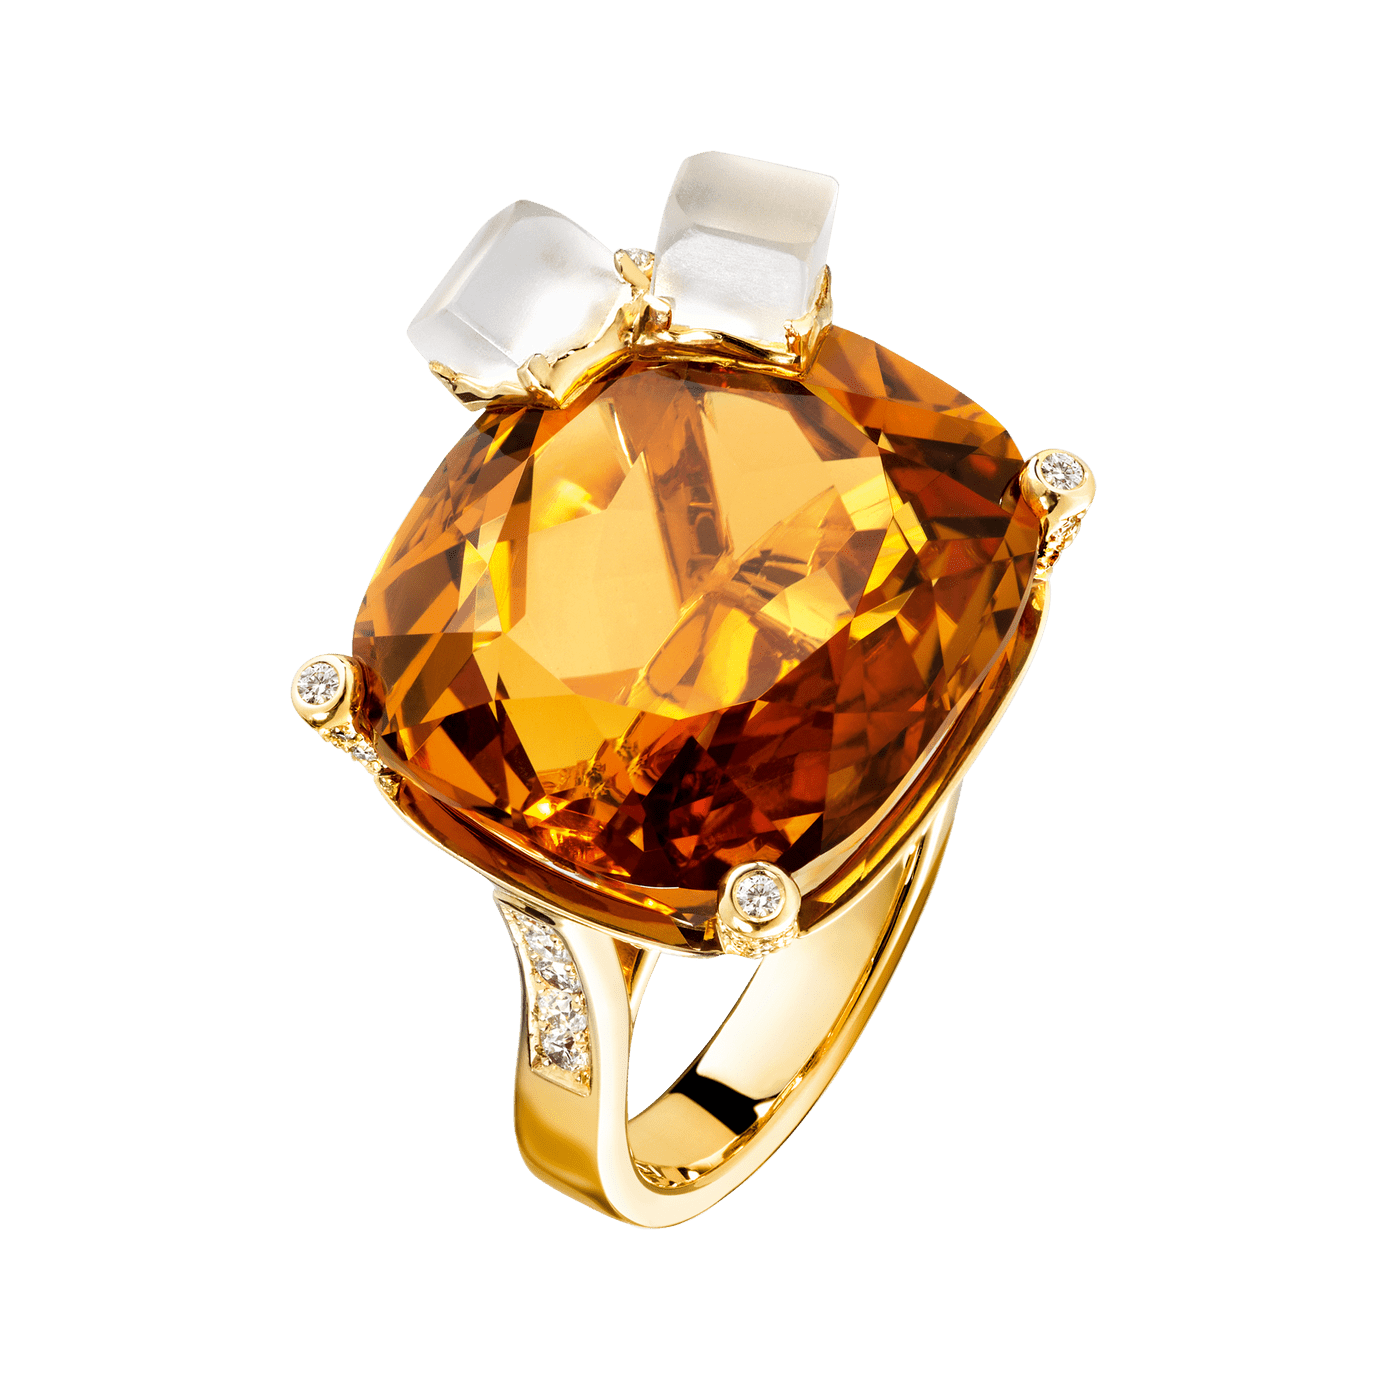 Limelight cocktail inspiration ring